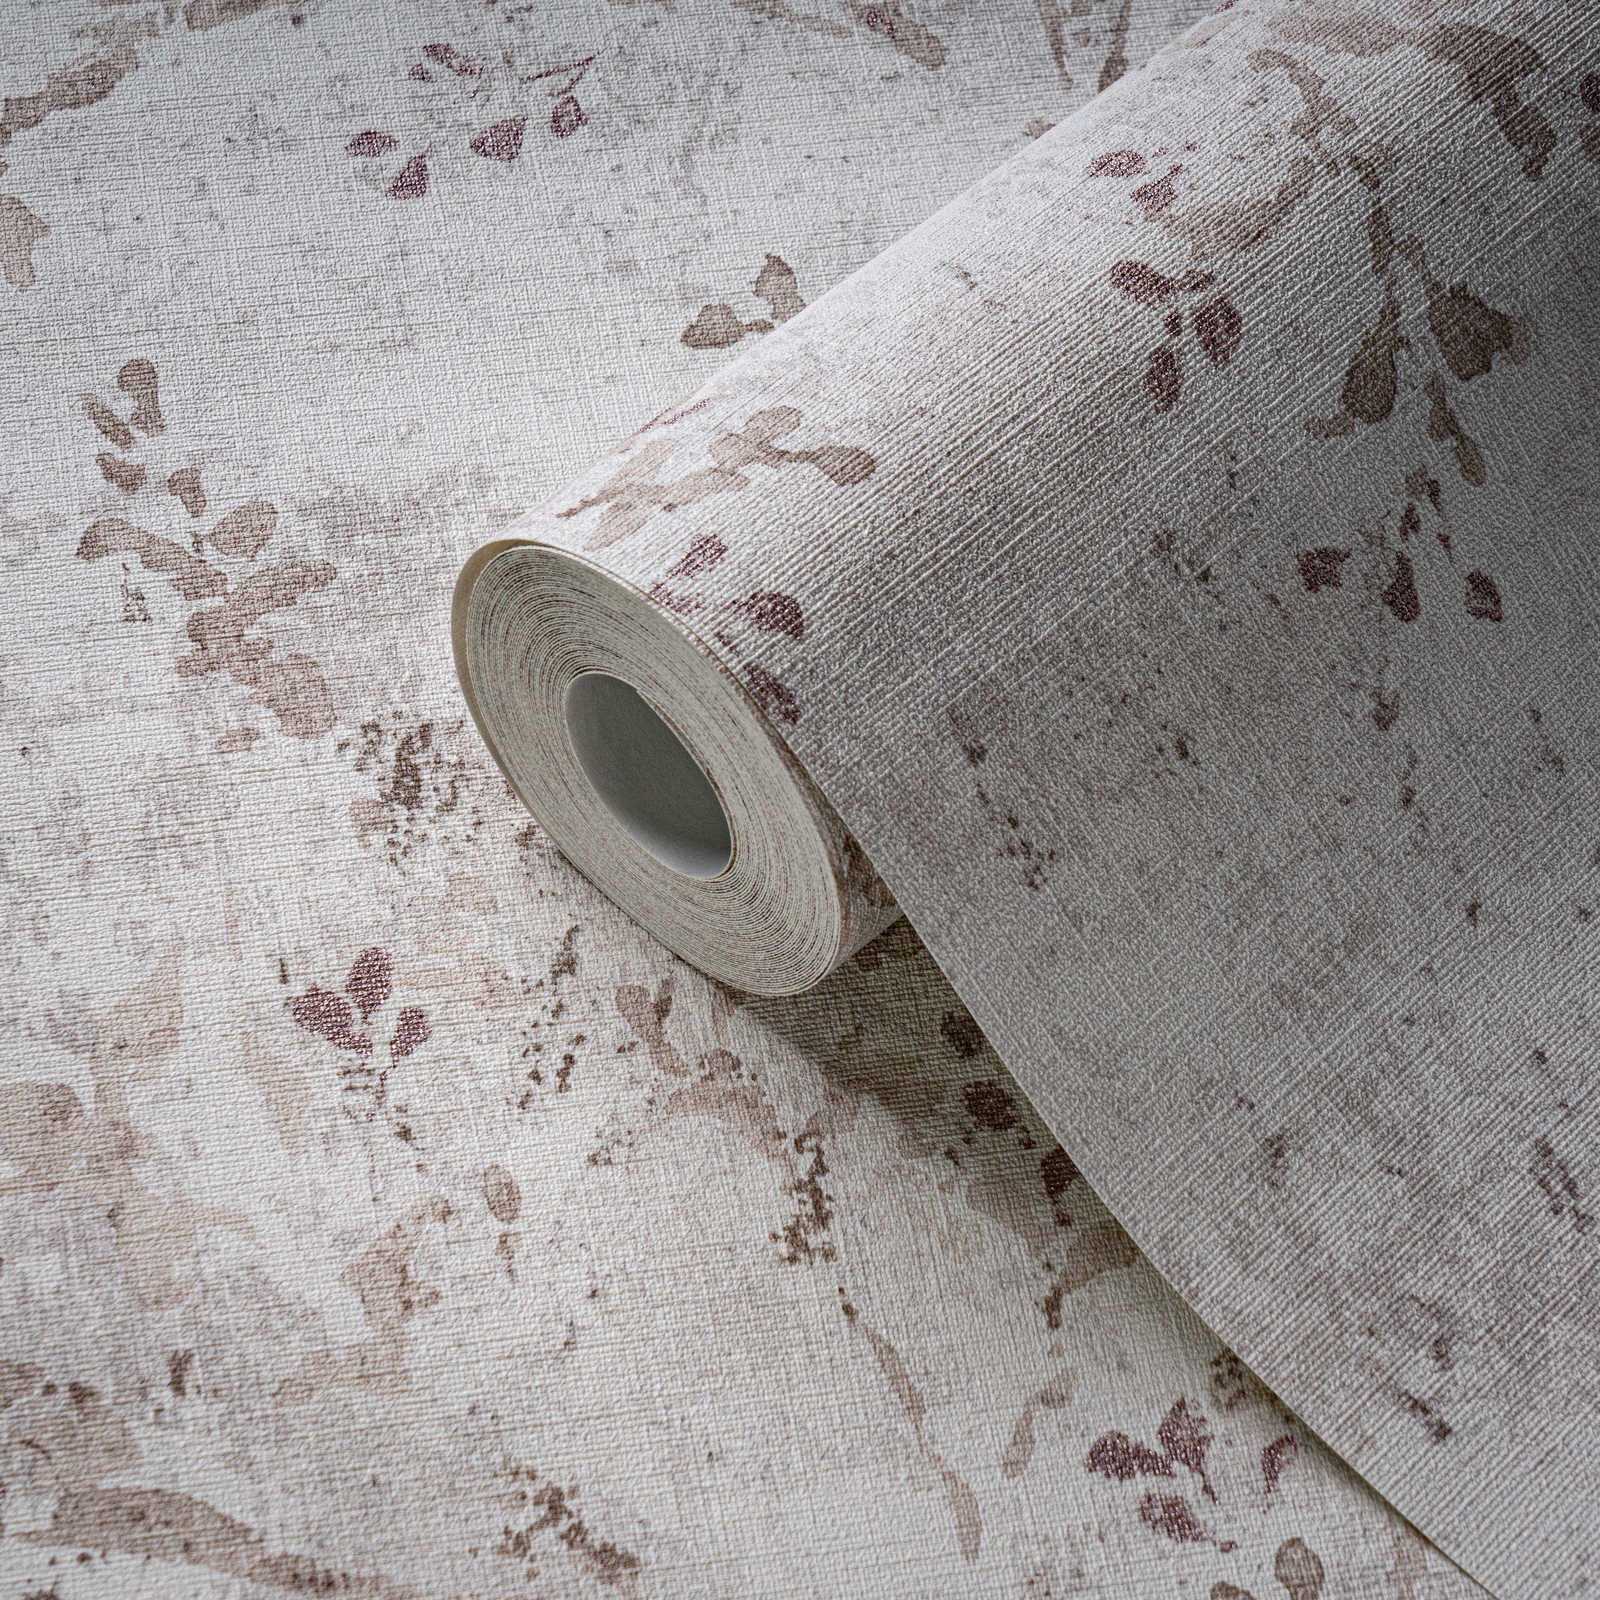             Non-woven wallpaper with a playful floral pattern - grey, beige, purple
        